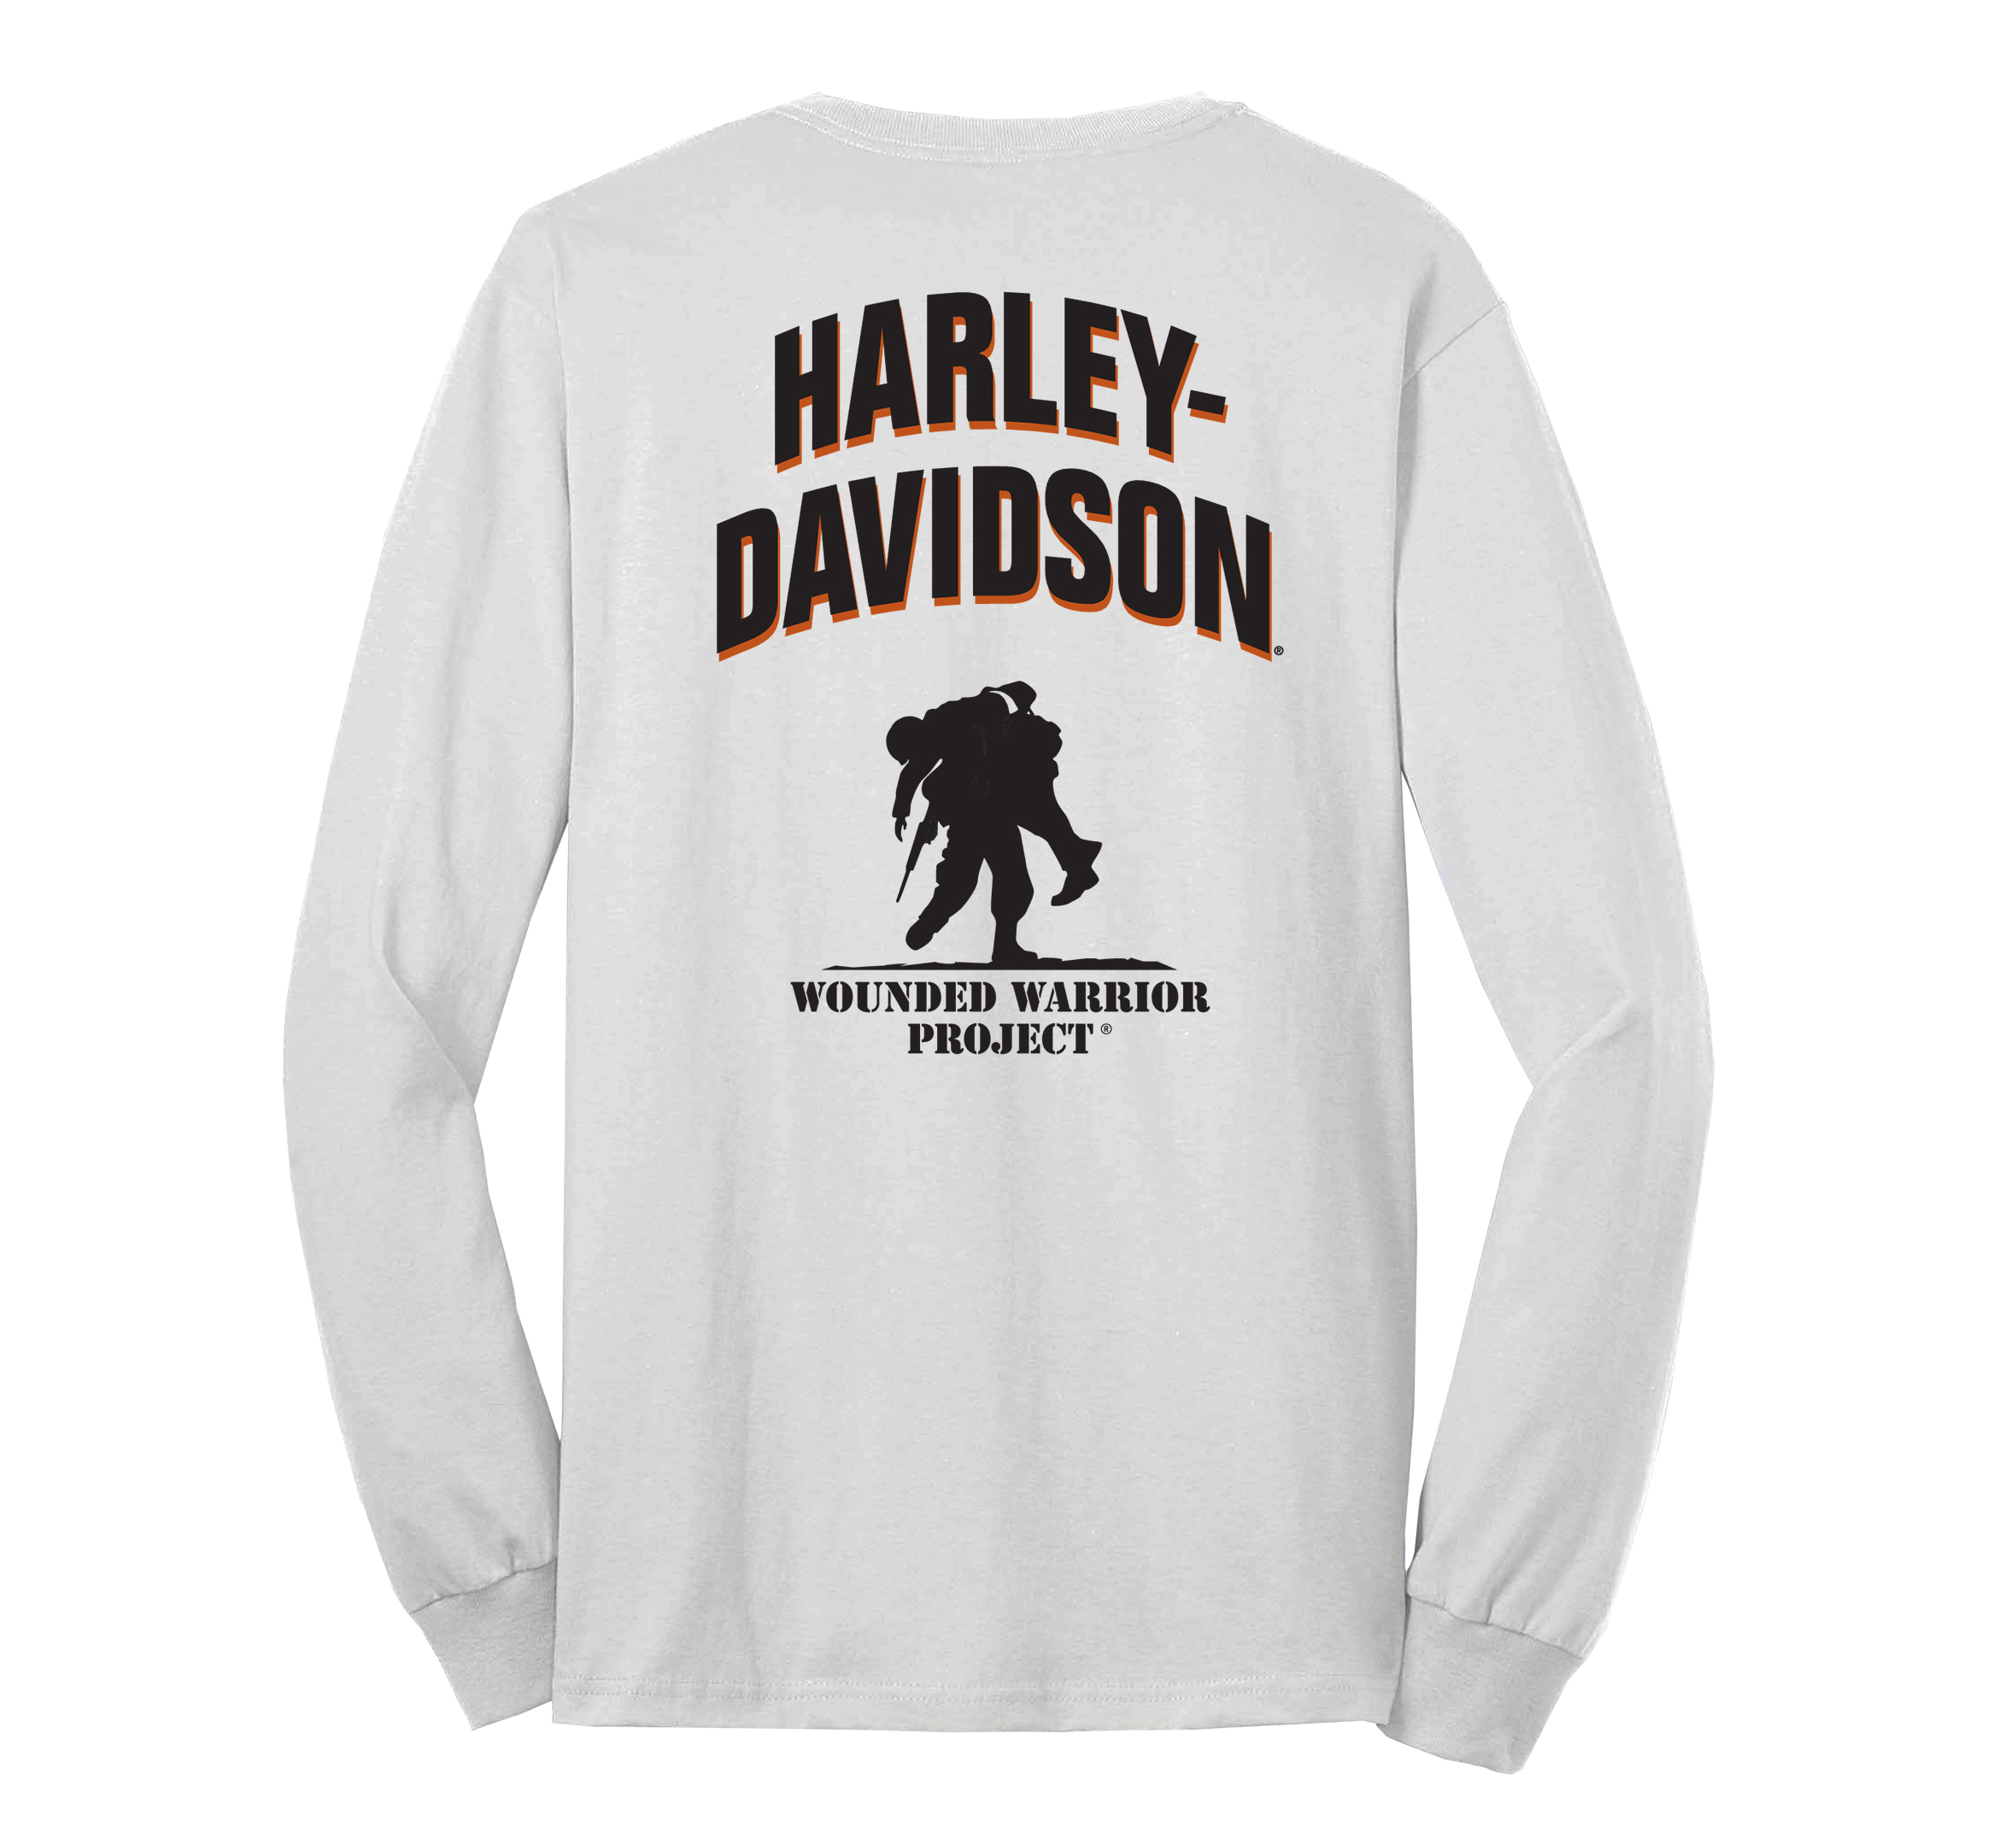 Men's Harley-Davidson Wounded Warrior Project Long-Sleeve Tee